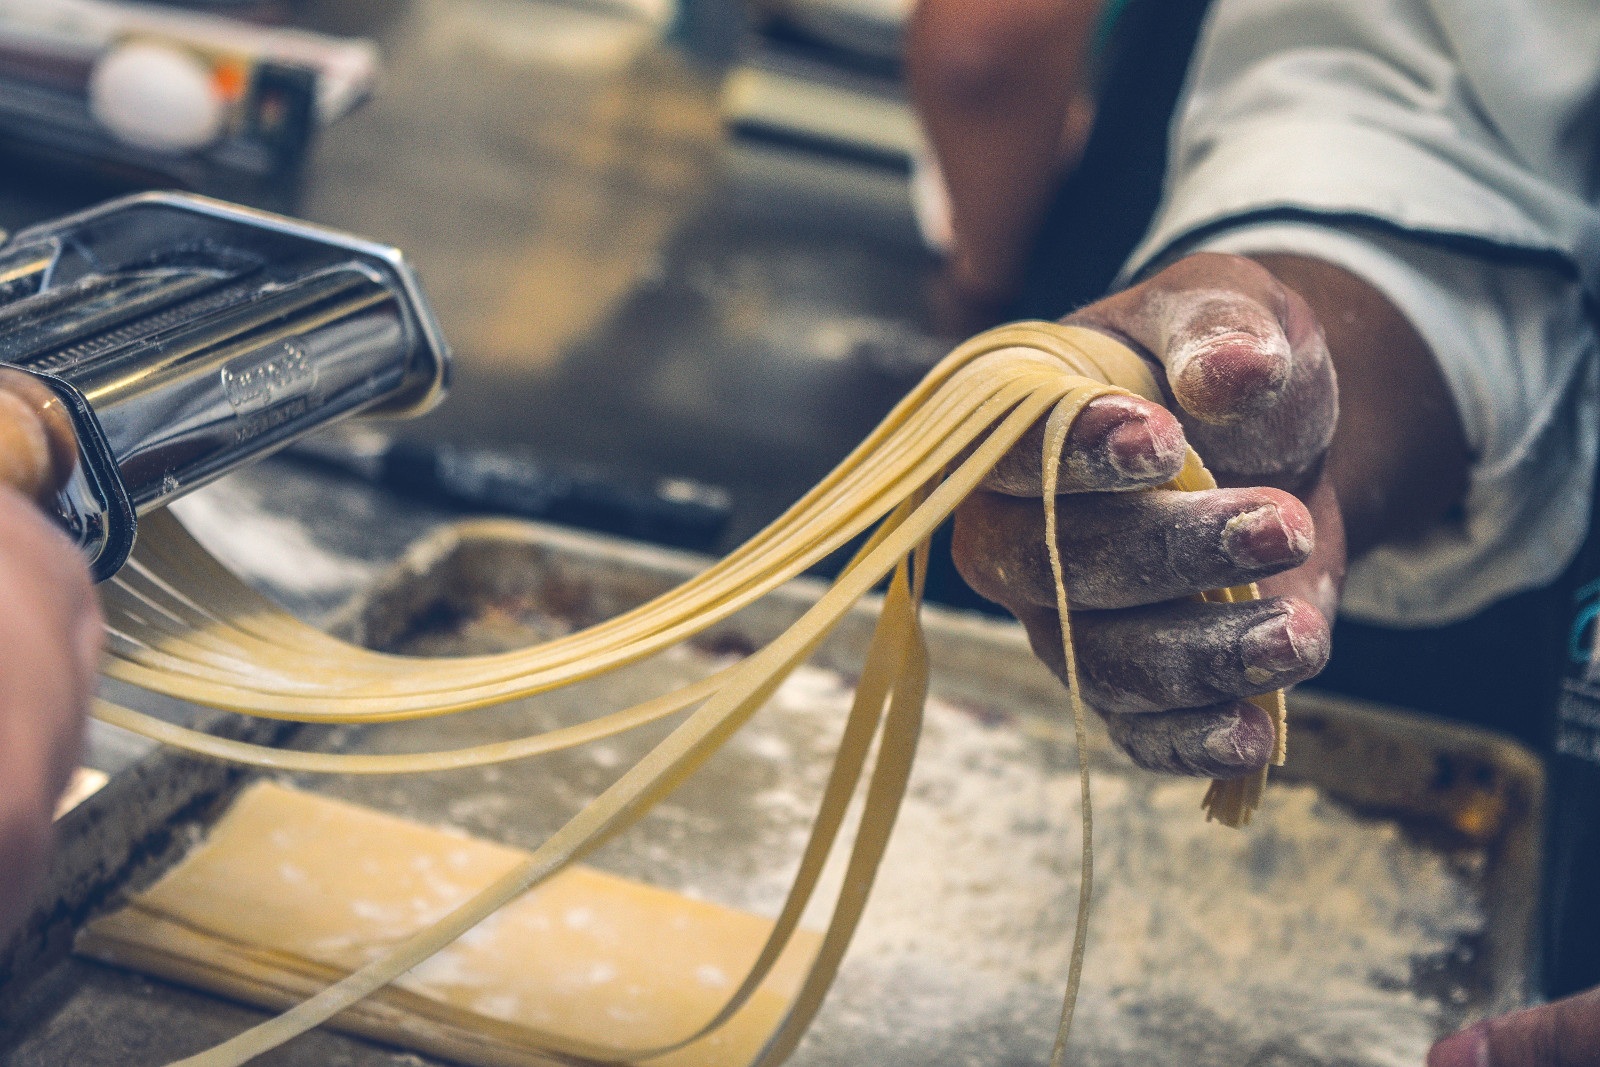 Expect Freshly Made Pastas and More at Tortello